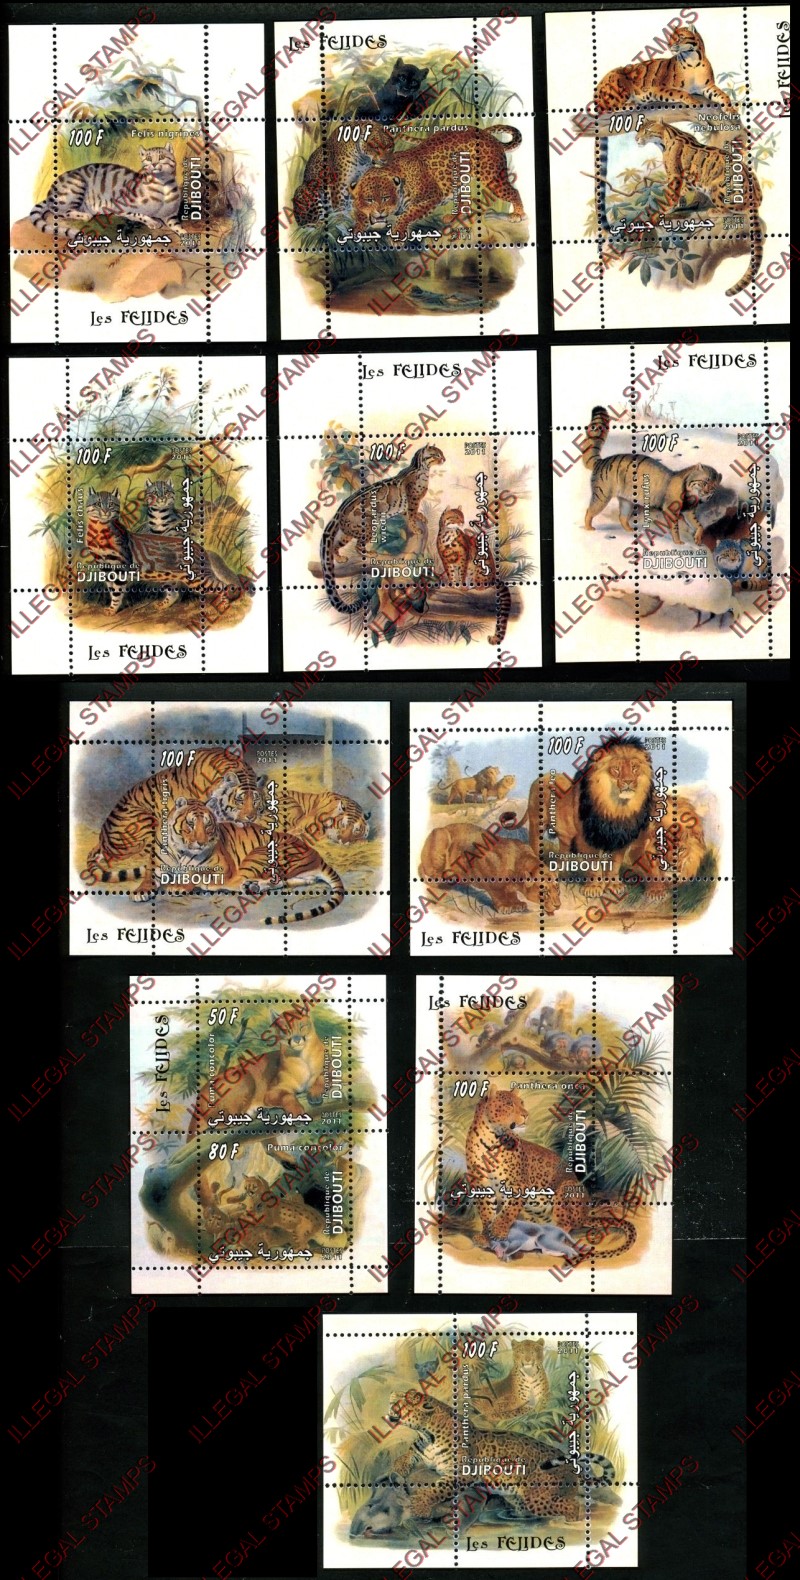 Djibouti 2011 Wild Cats Illegal Stamp Souvenir Sheets of 1 and 2